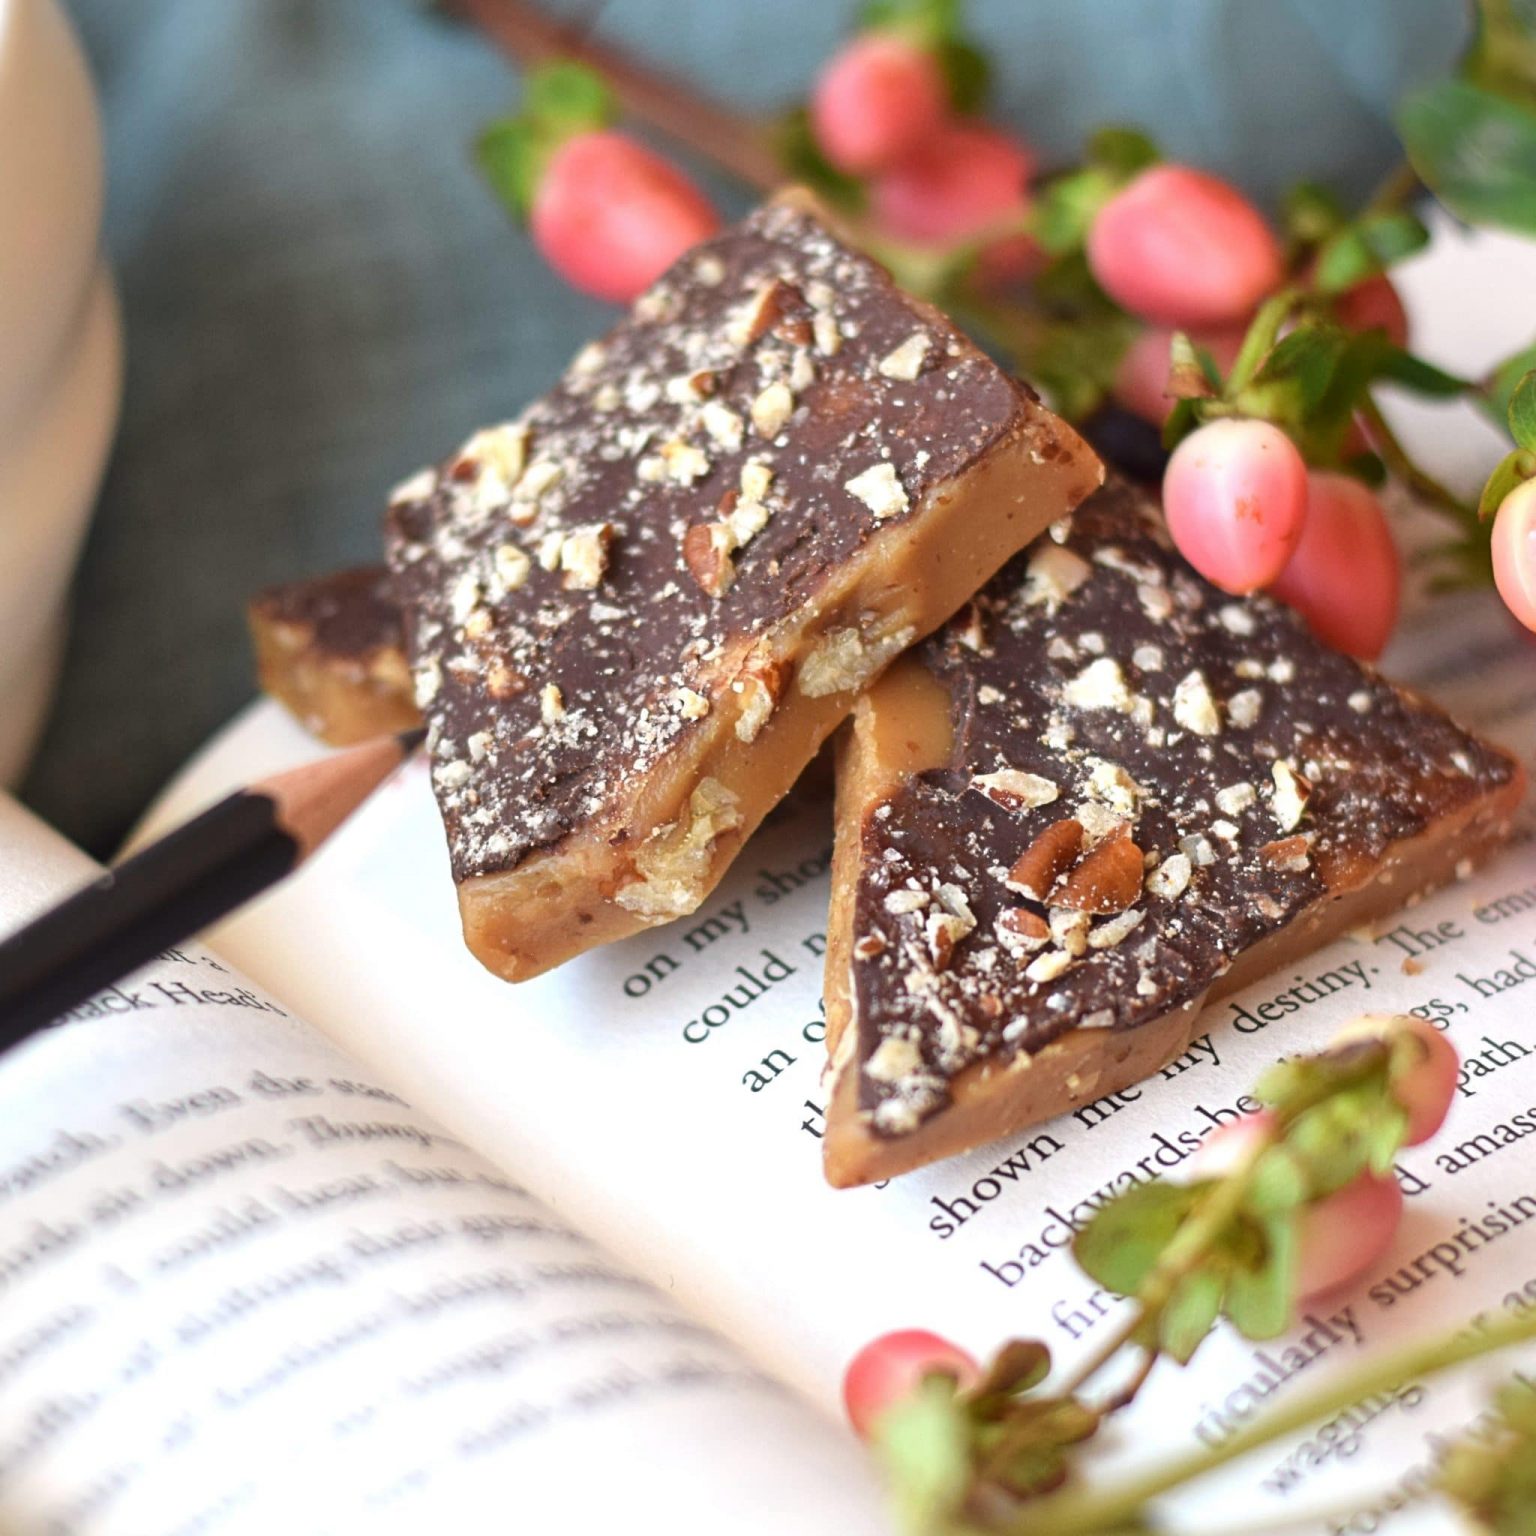 Stack of pieces of English toffee with gourmet dark chocolate spread on top and then sprinkled with chopped pecans; the pieces are sitting on an open book with flower buds in the back and foregrounds